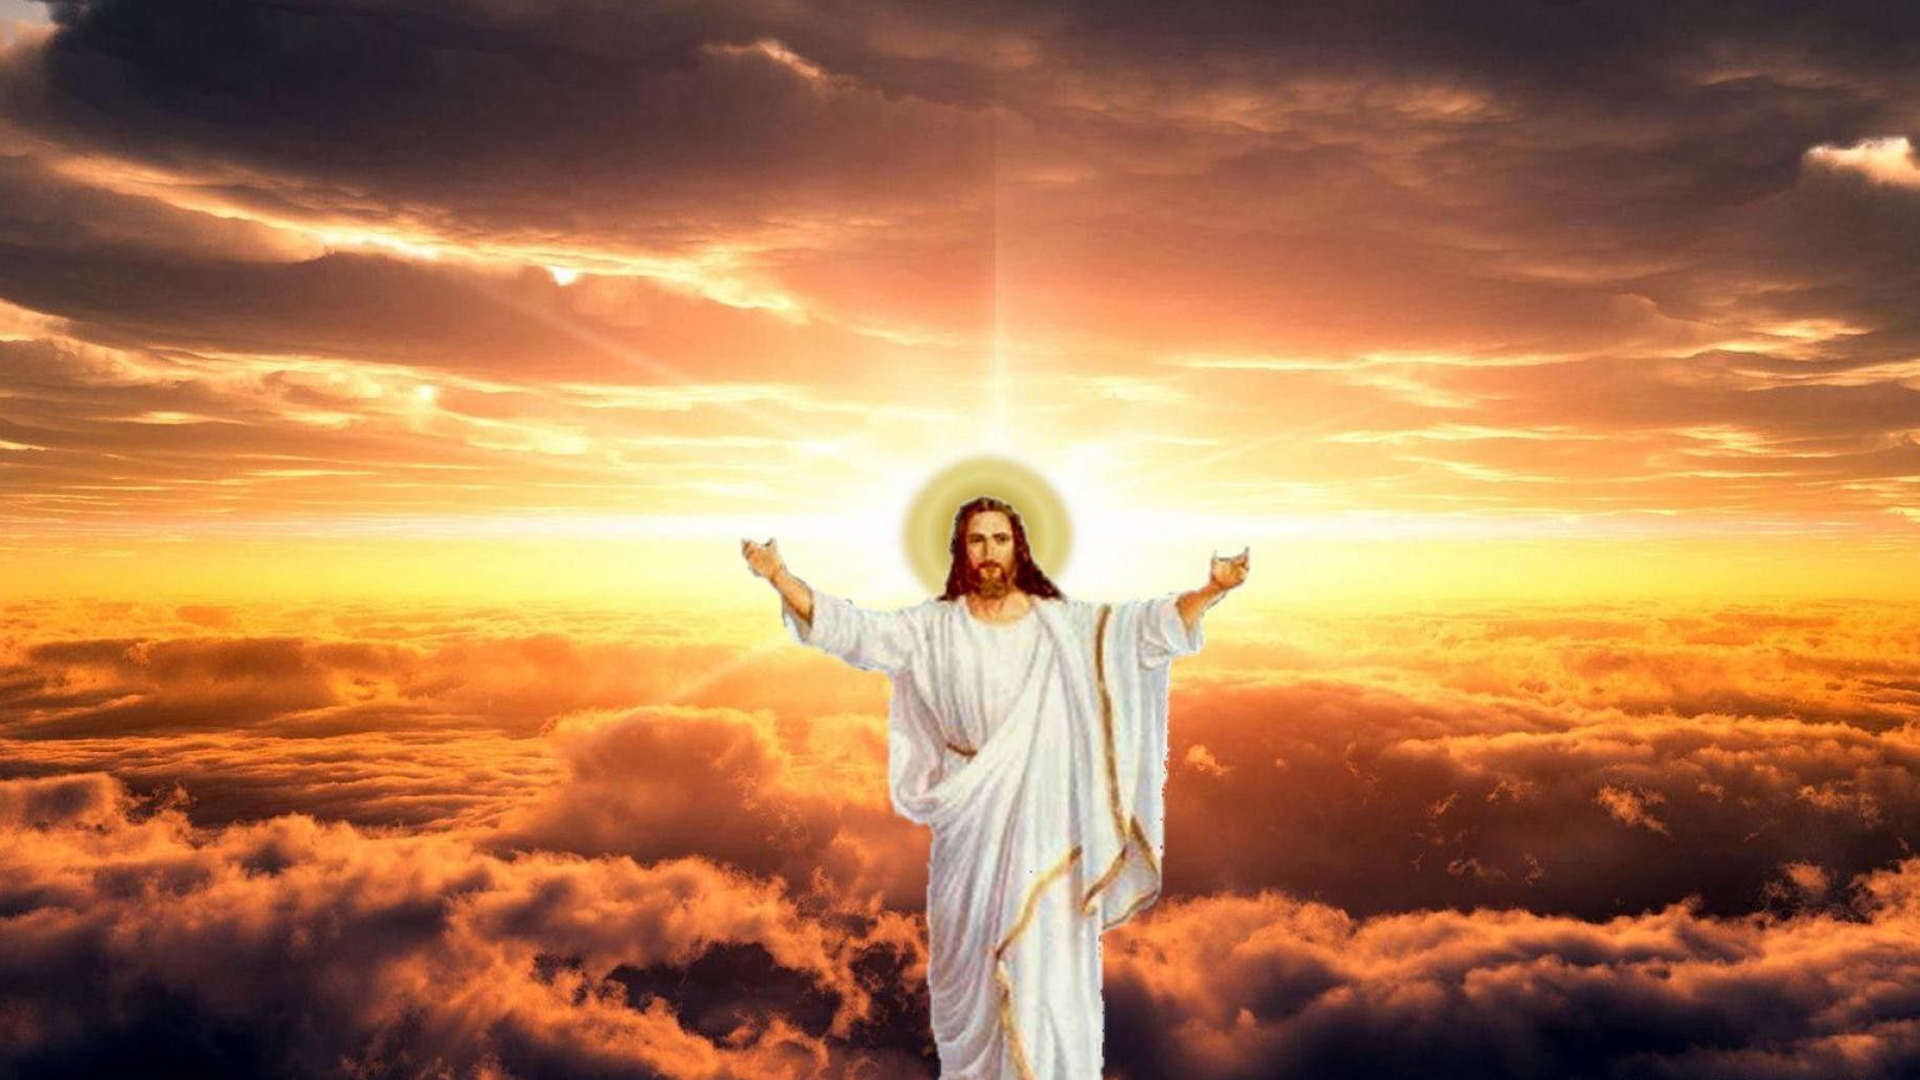 Jesus Christ With Wallpaper Of Sunbeam And Clouds 2K Jesus